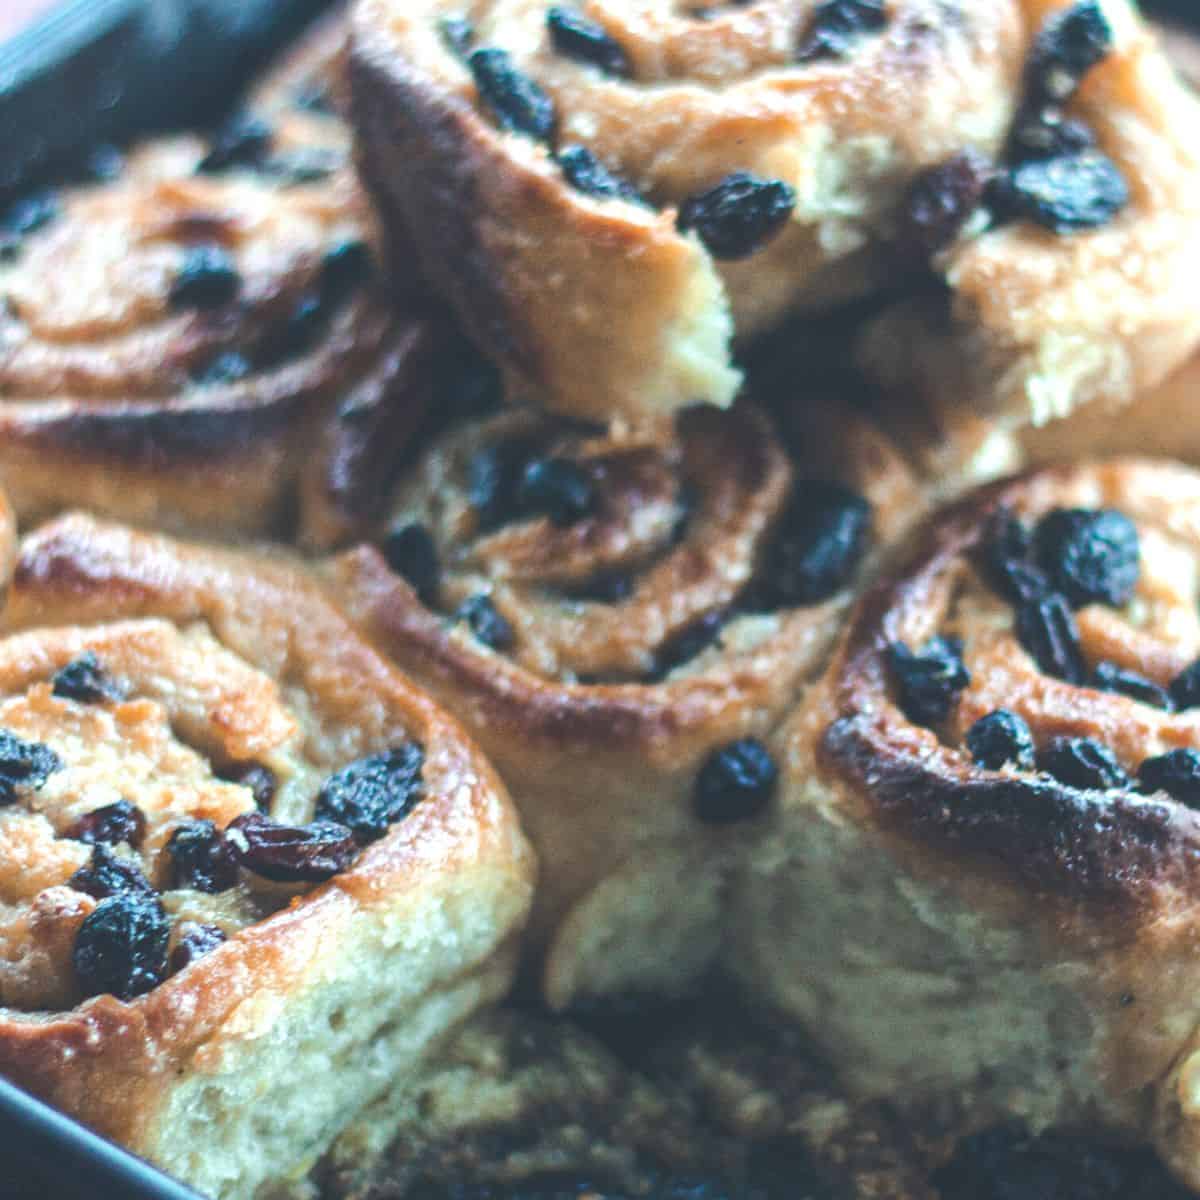 A pan full of baked chelsea buns